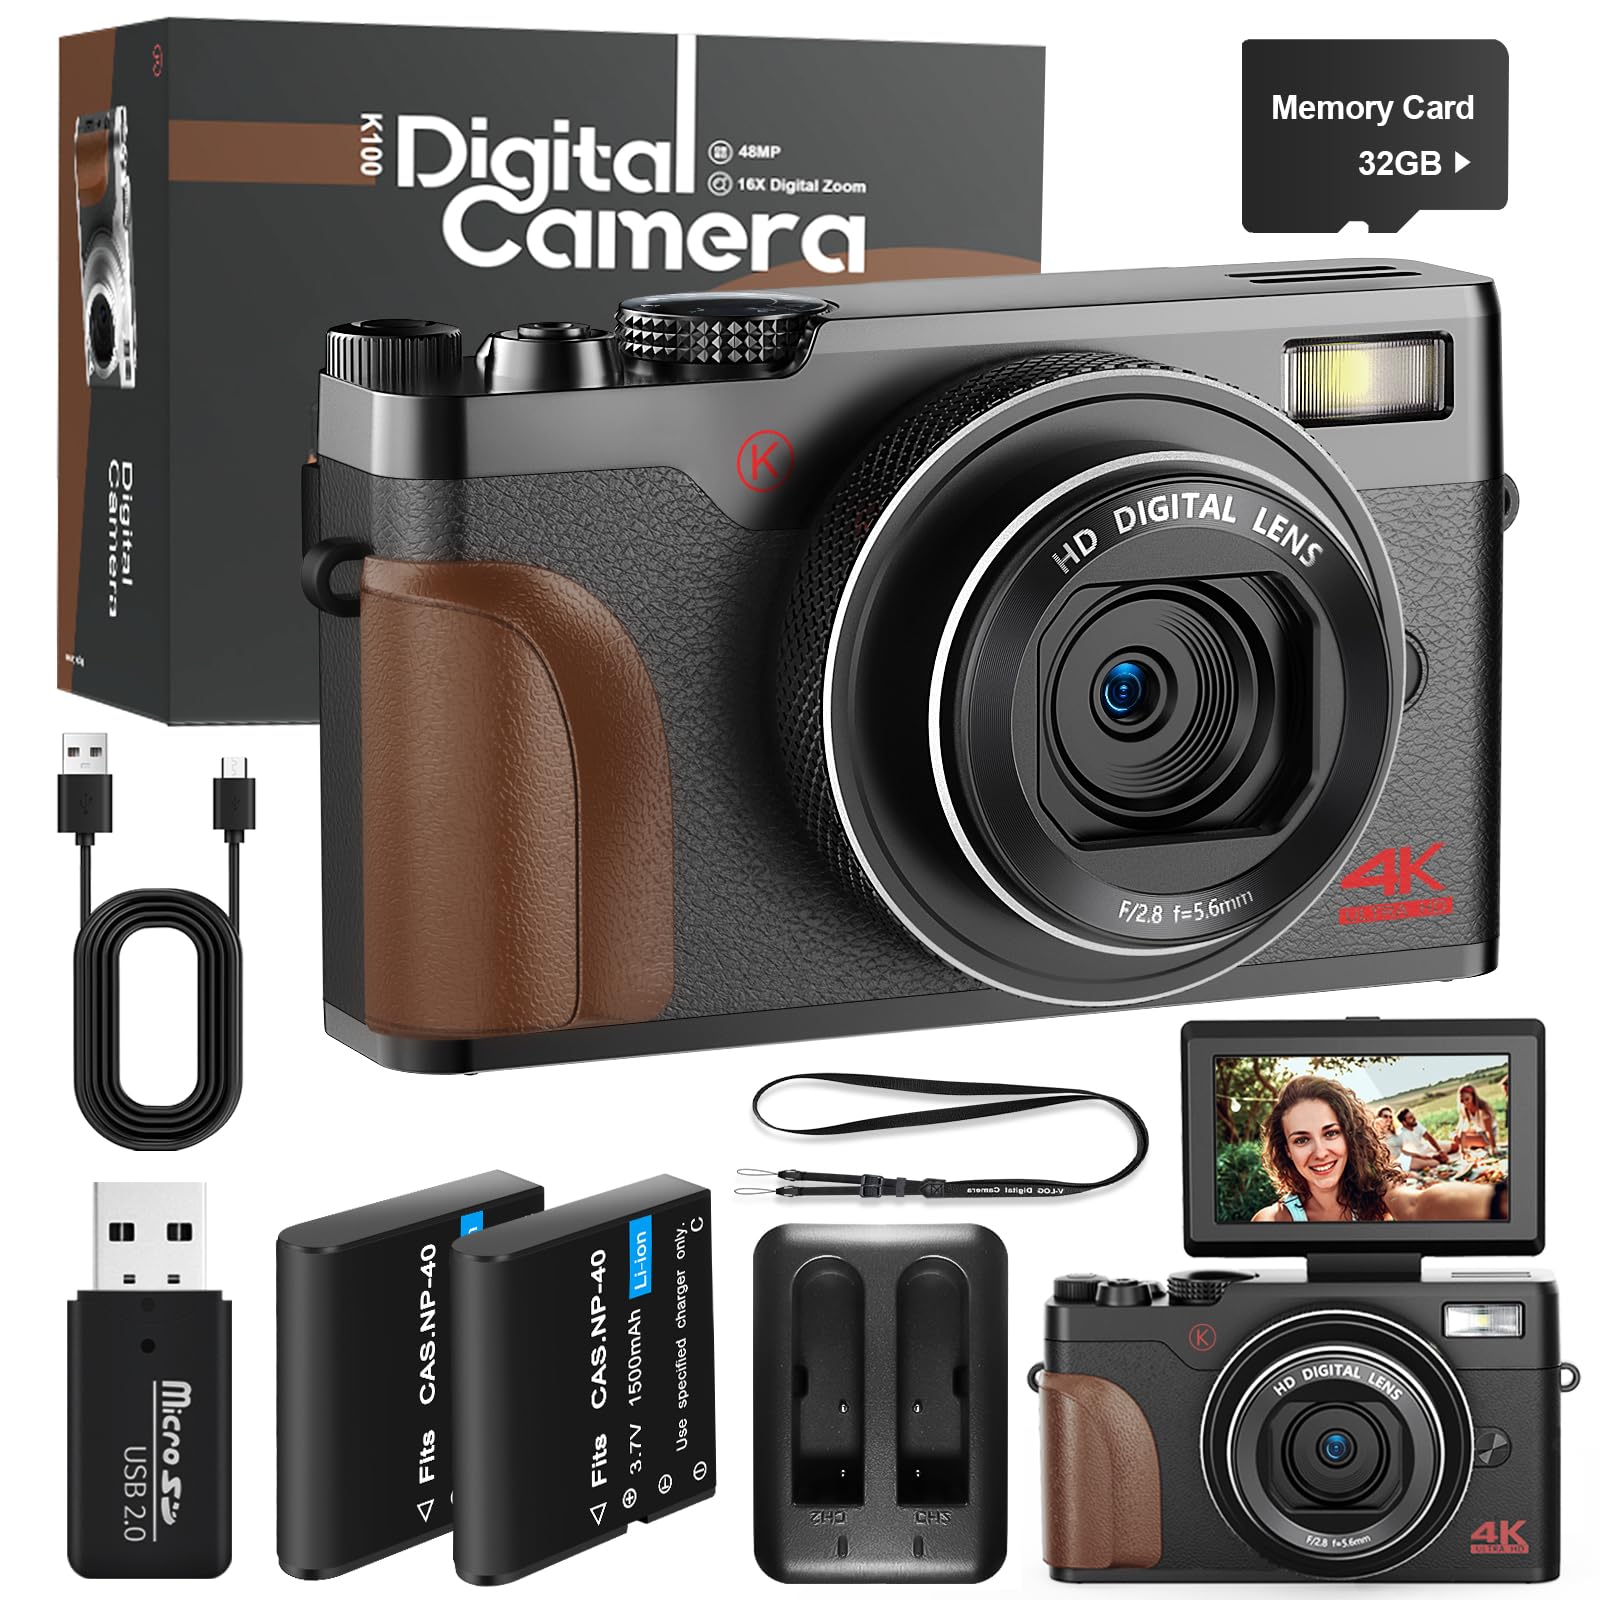 Digital Camera, 4K&48MP Cameras for Photography, Vlogging Camera for Youtube, Flip Screen Digital Point and Shoot Camera with 16X Zoom, Compact Small Camera for Beginner with 32GB SD Card(2 Batteries)